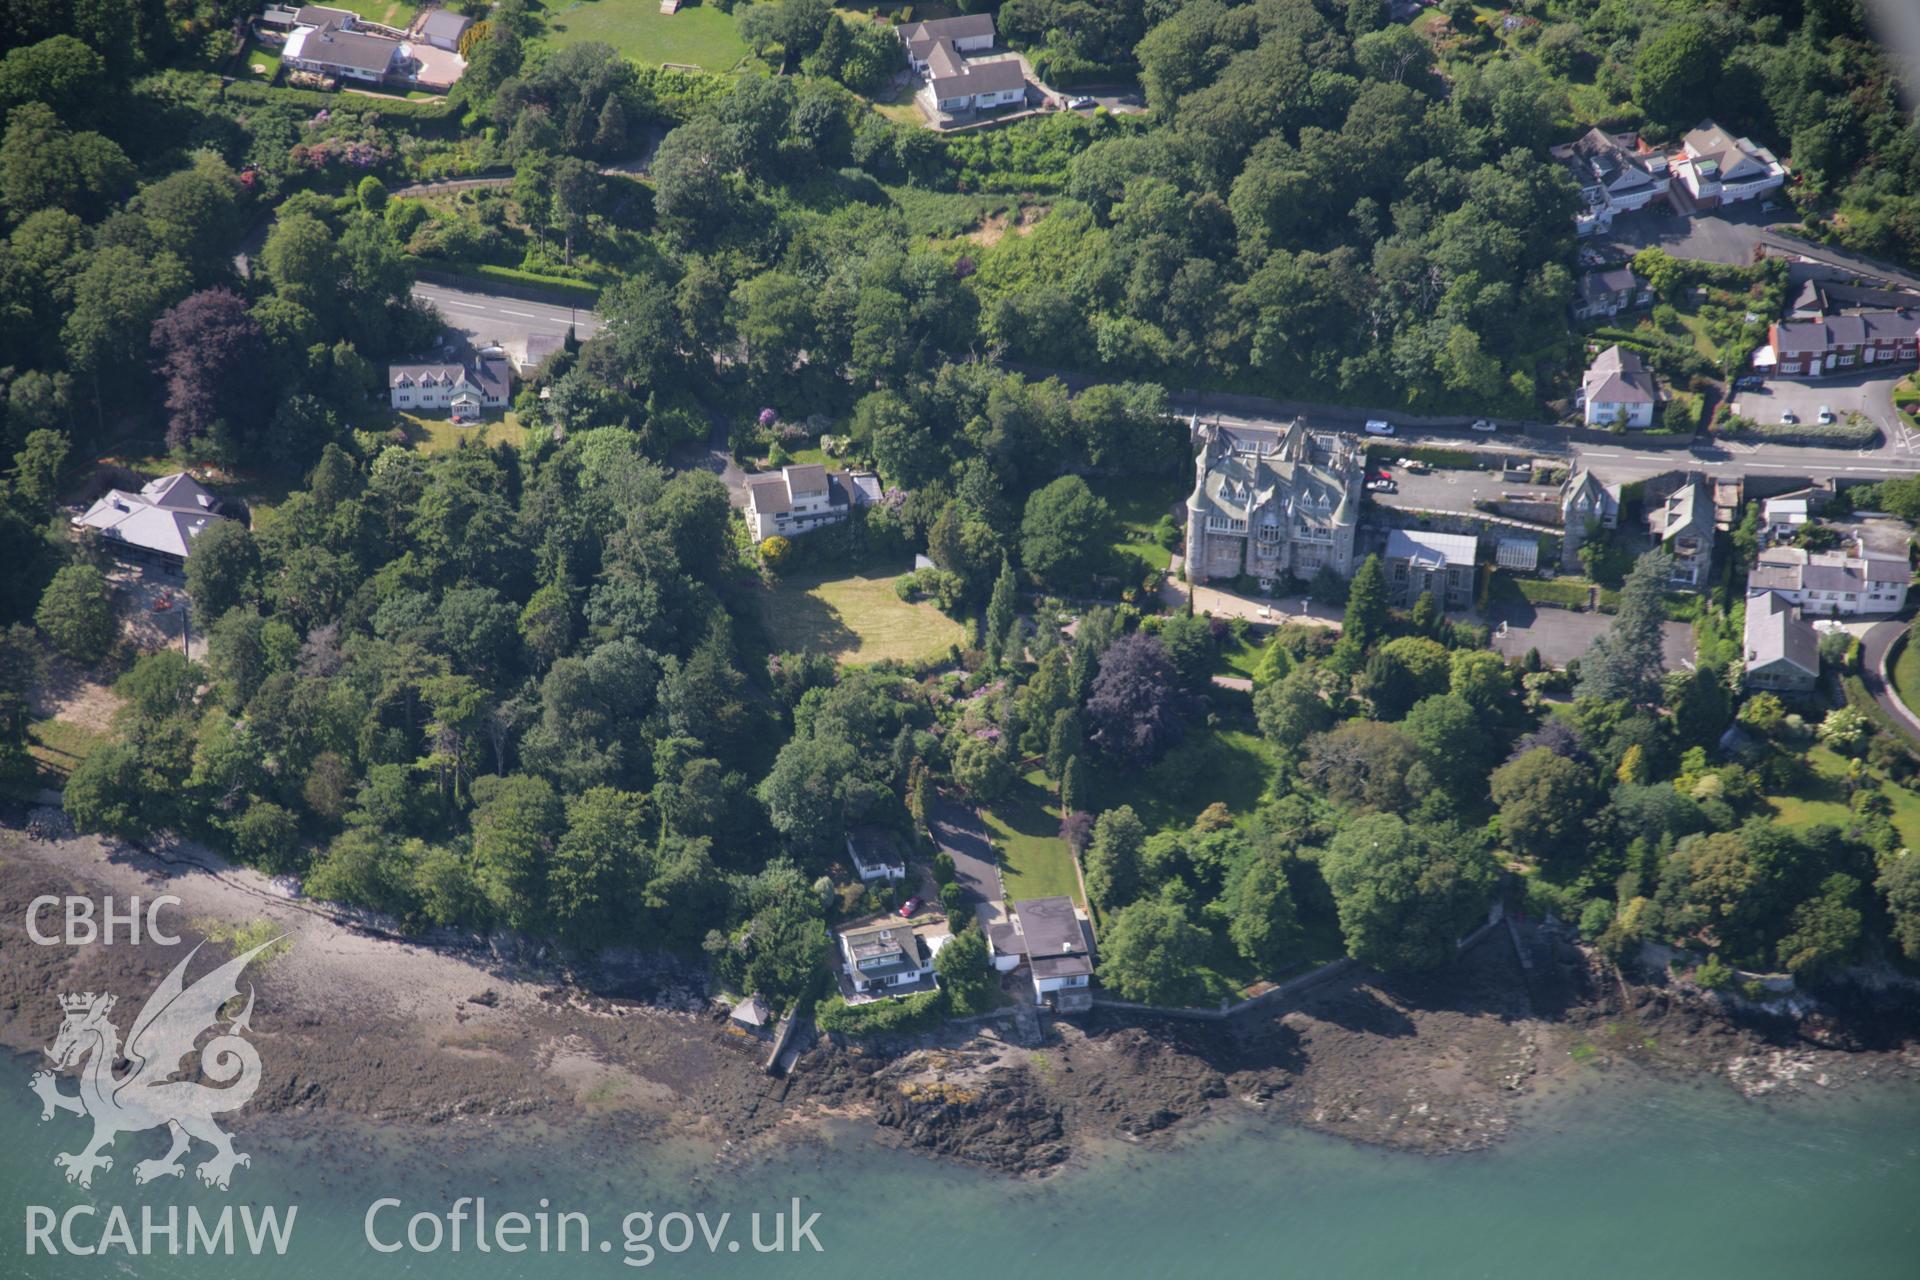 RCAHMW colour oblique aerial photograph of Rhianfa Garden, Menai Bridge, from the south-east. Taken on 14 June 2006 by Toby Driver.